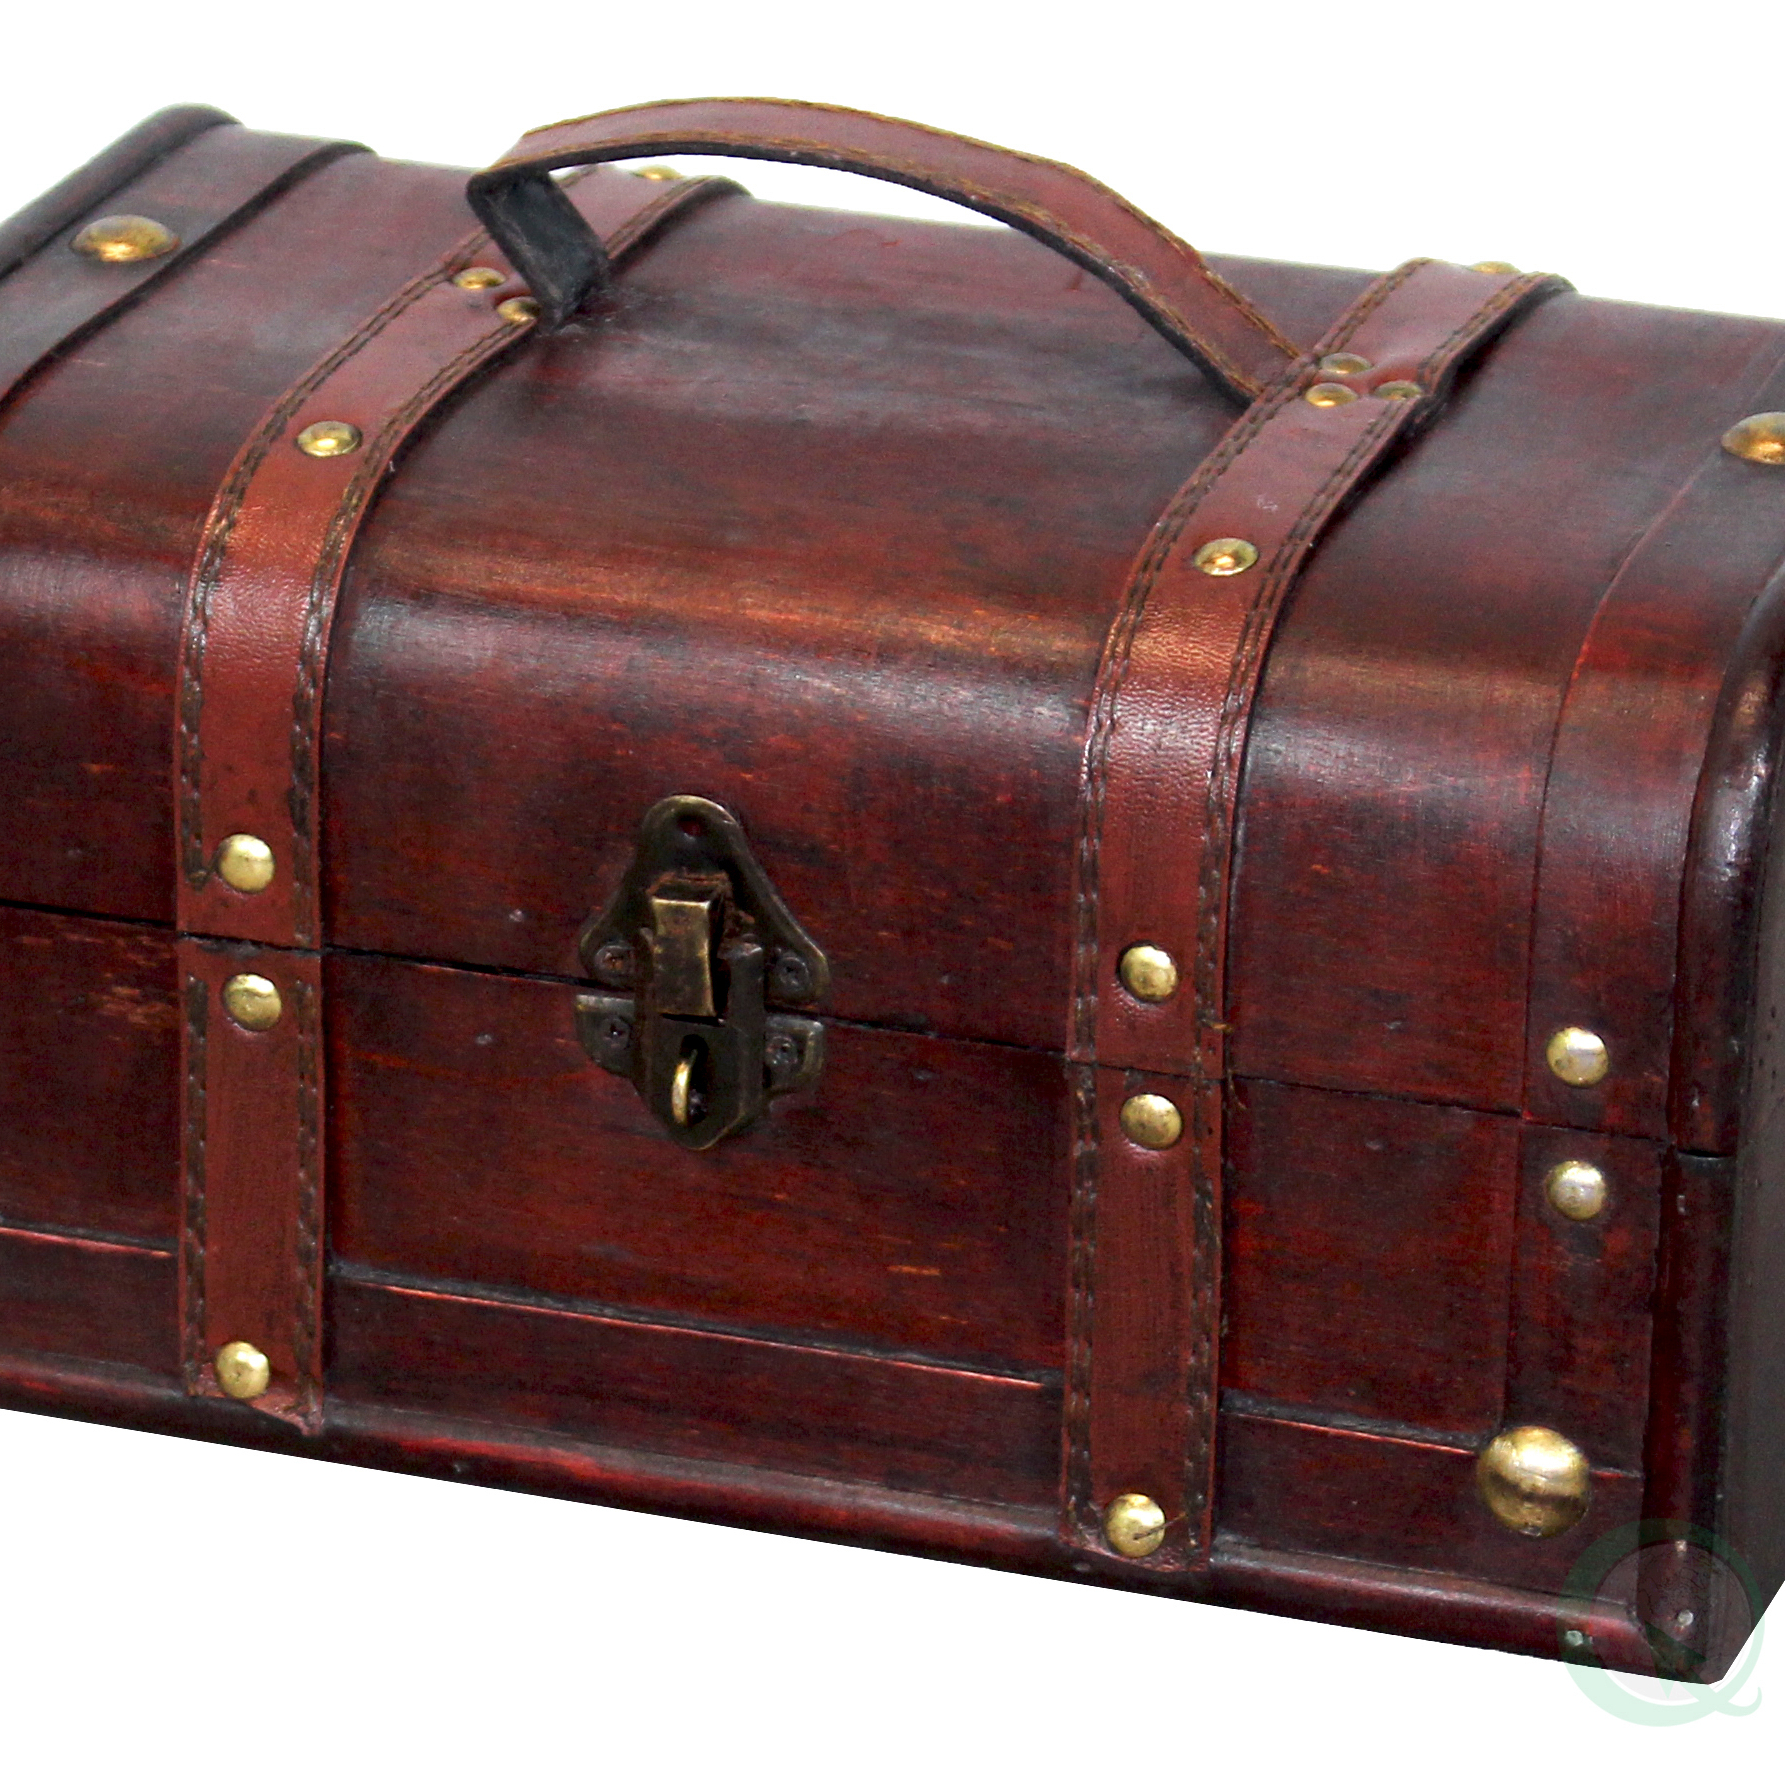 Decorative Vintage Wood Treasure Box - Wooden Trunk Chest With Handle - Chest With Padlock